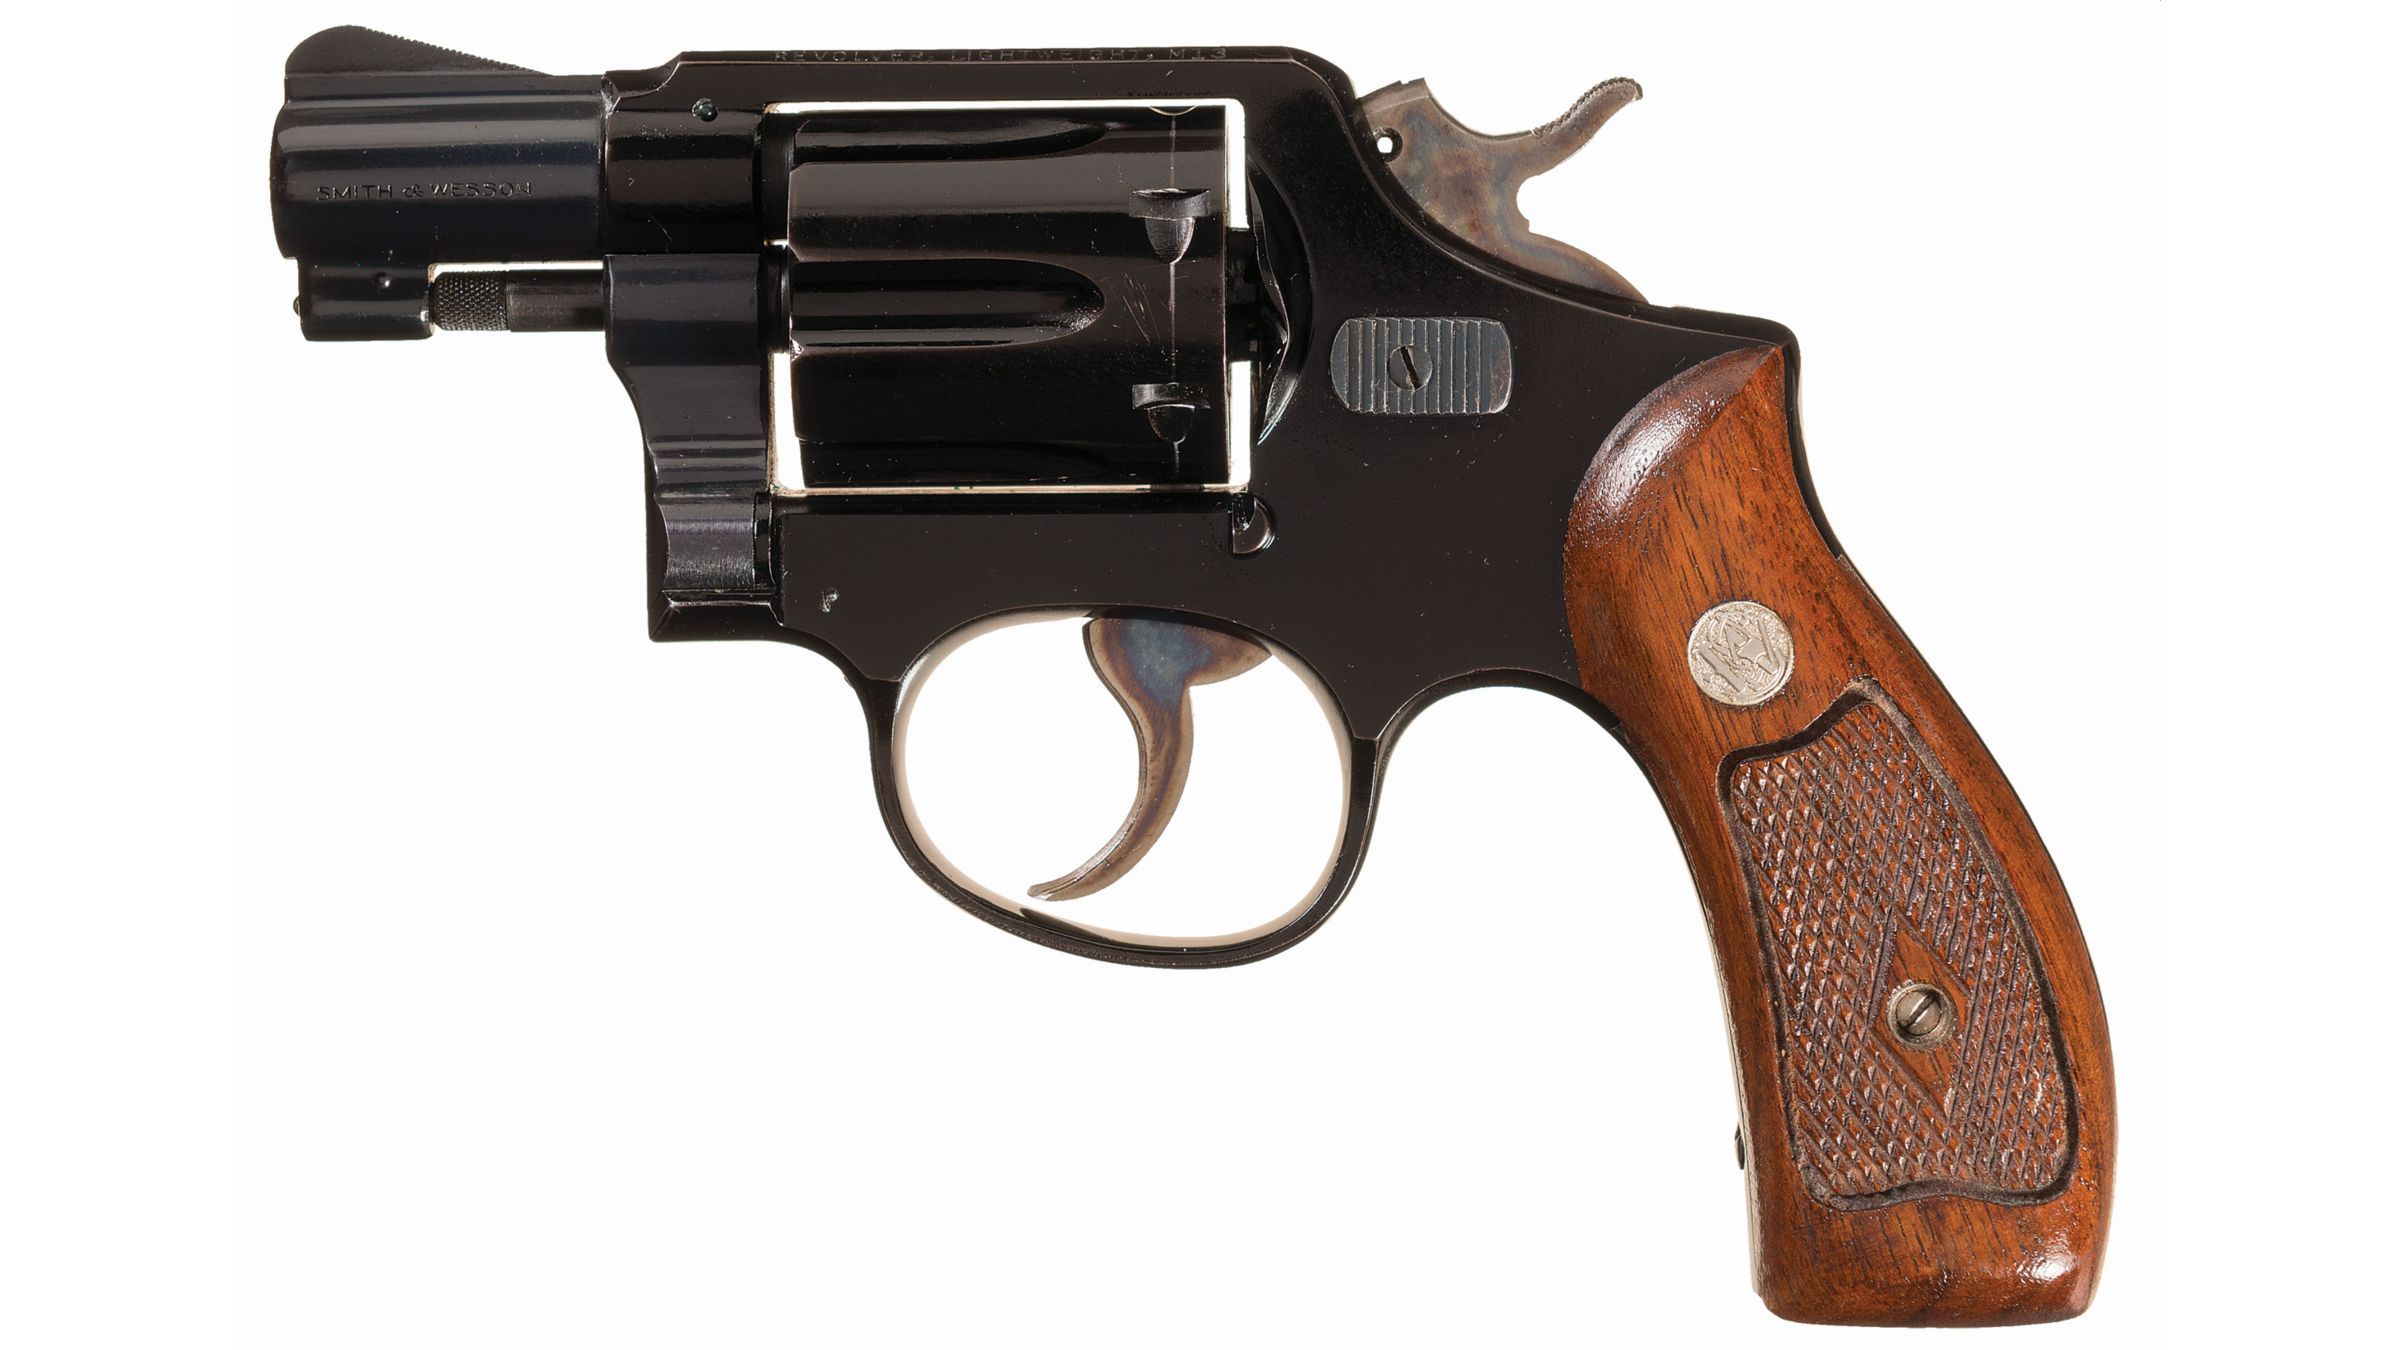 Smith & Wesson Aircrewman Revolver with Holster and Factory LetterThis ...